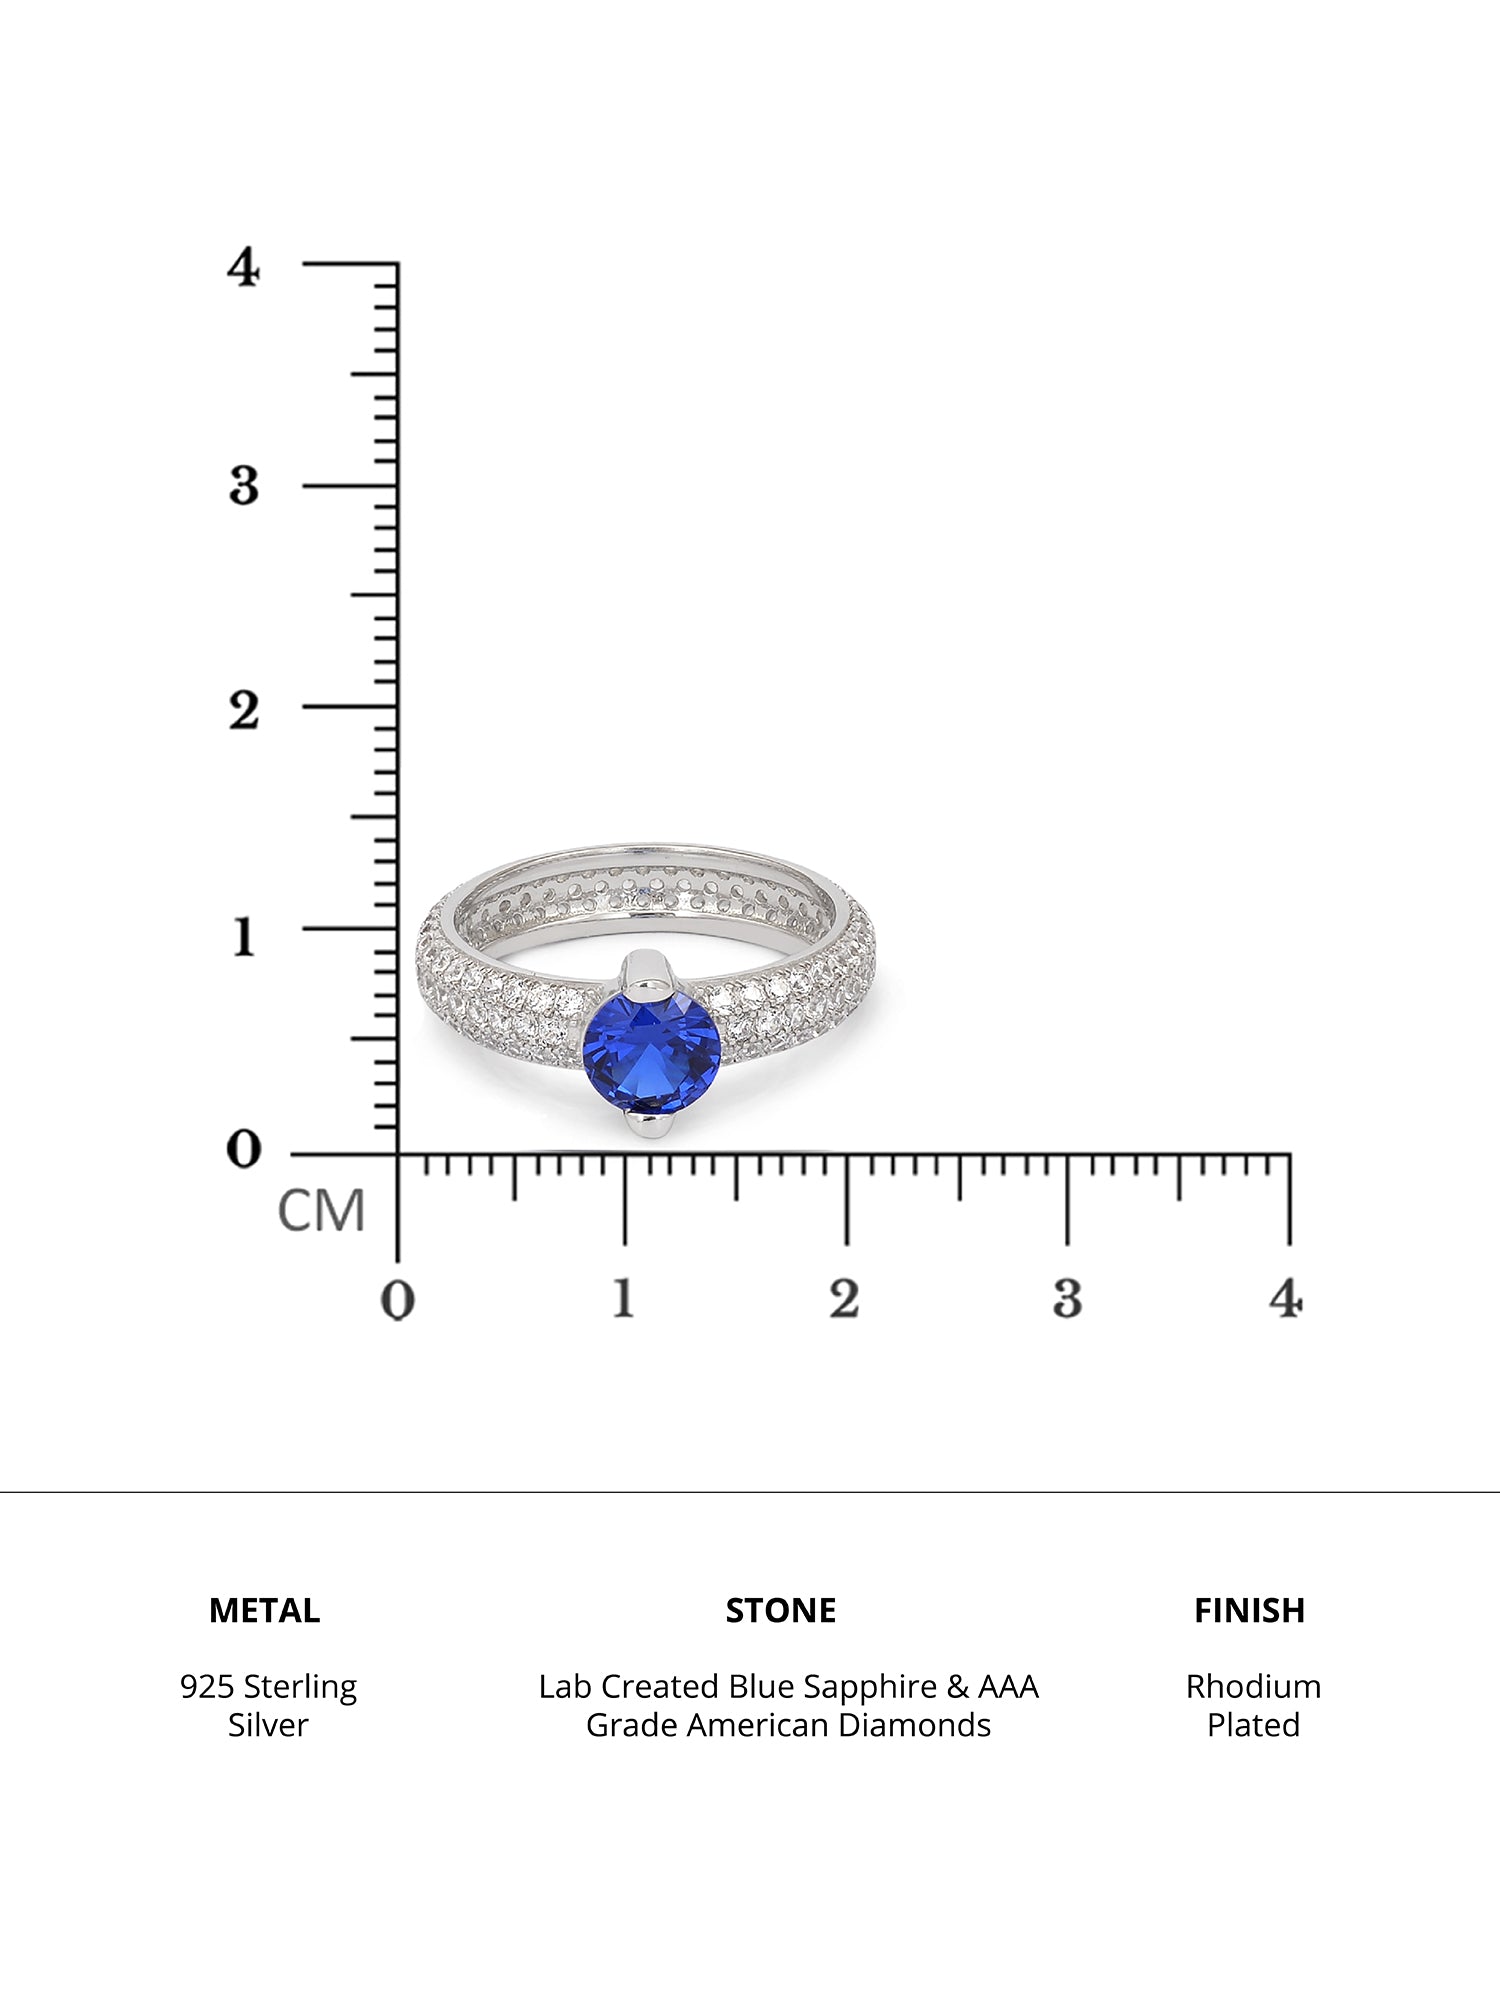 1 Carat Ornate Blue Sapphire Solitaire Ring For Women-3